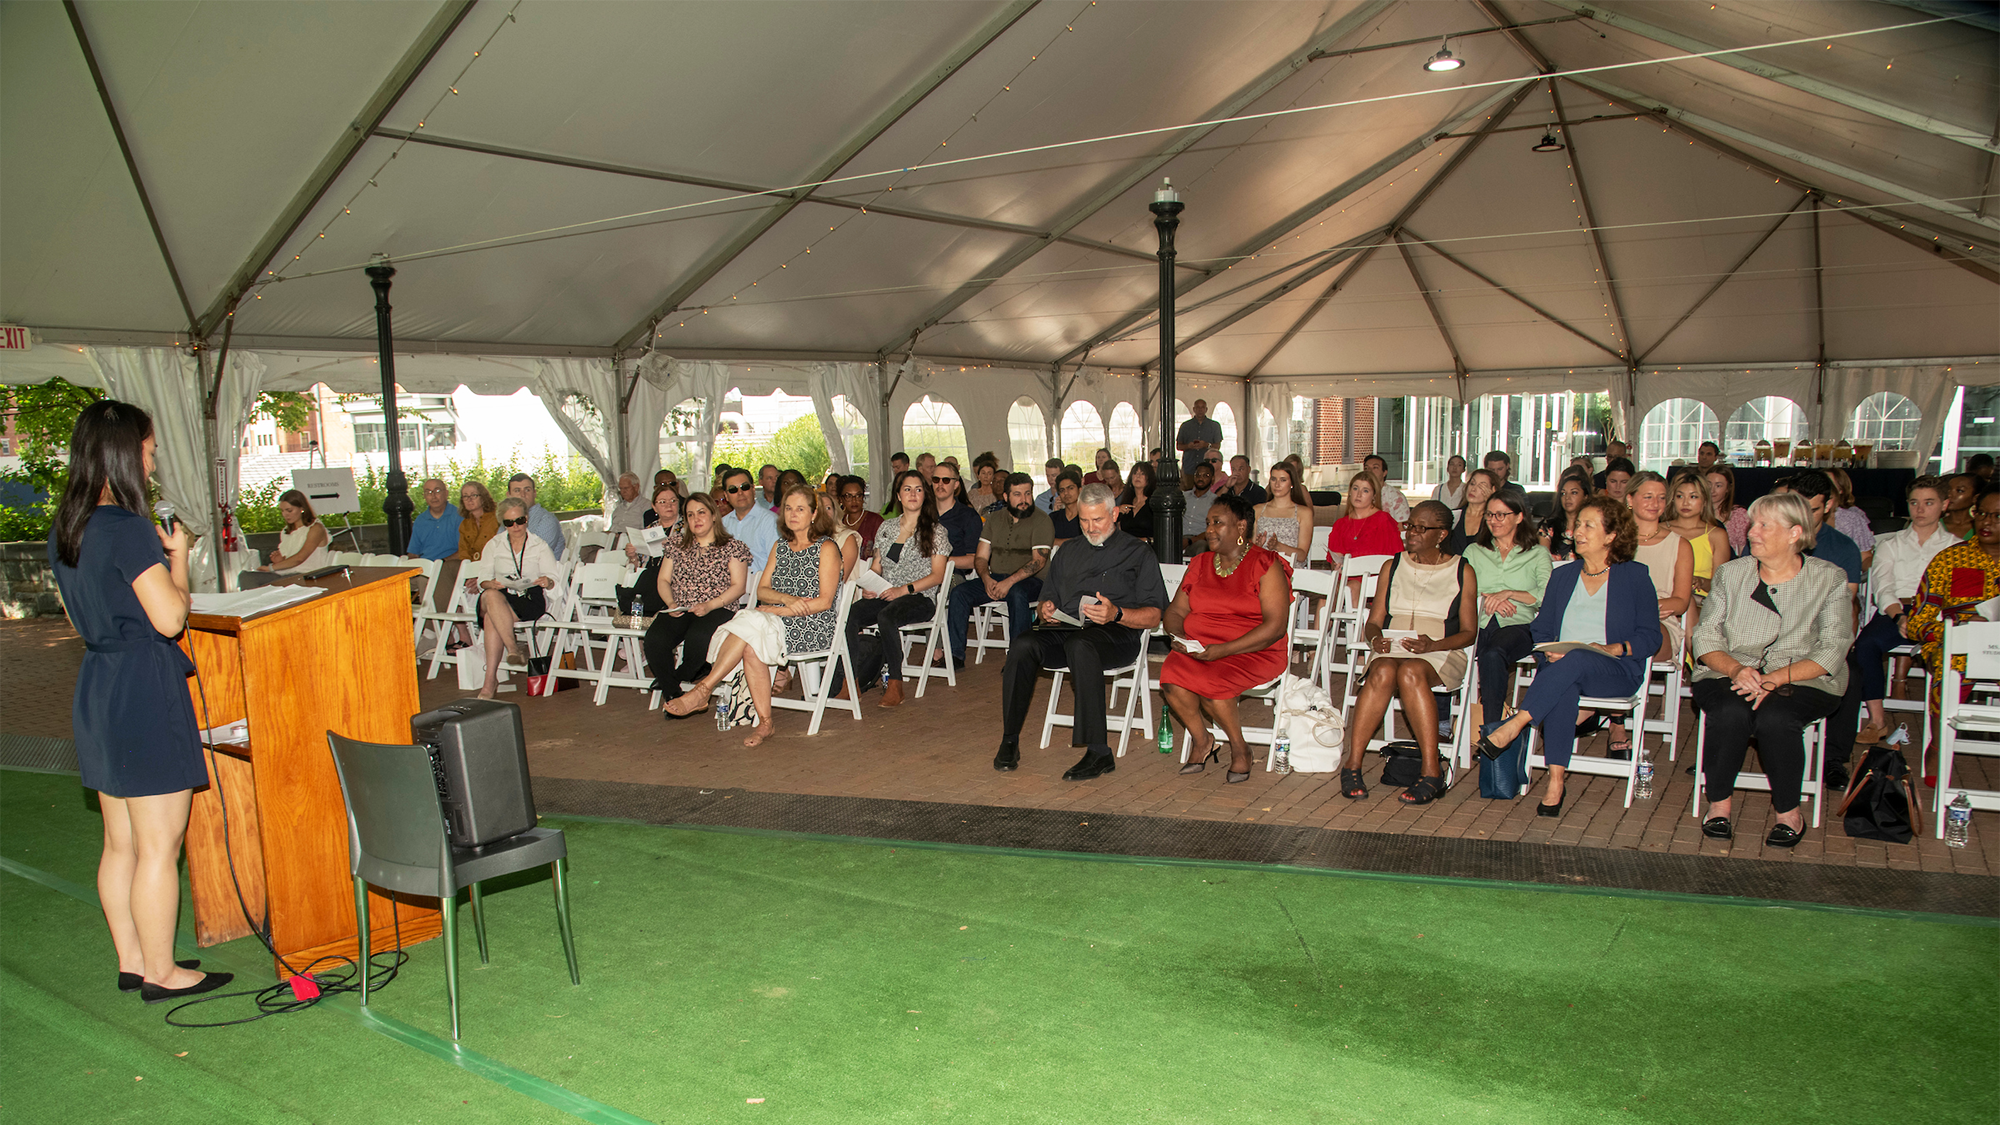 A view of the crowd attending the Nursing White Coat ceremony in a large tent outdoors